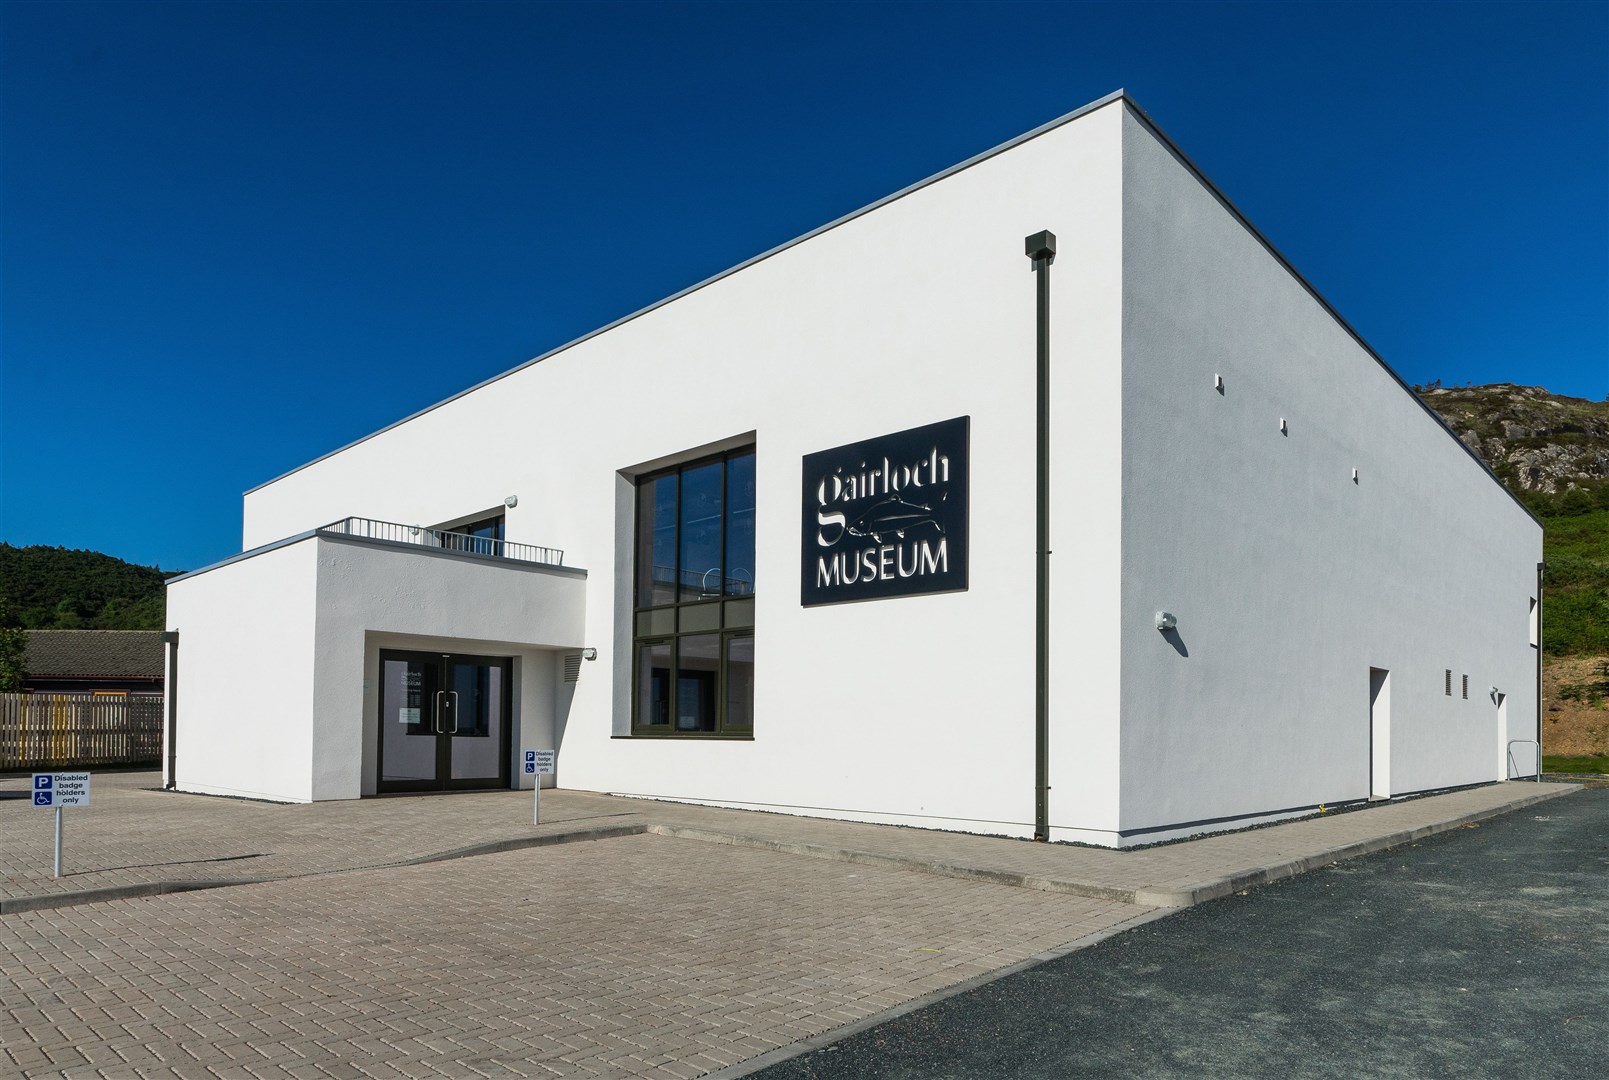 Gairloch Museum has been busy since it reopened its doors.